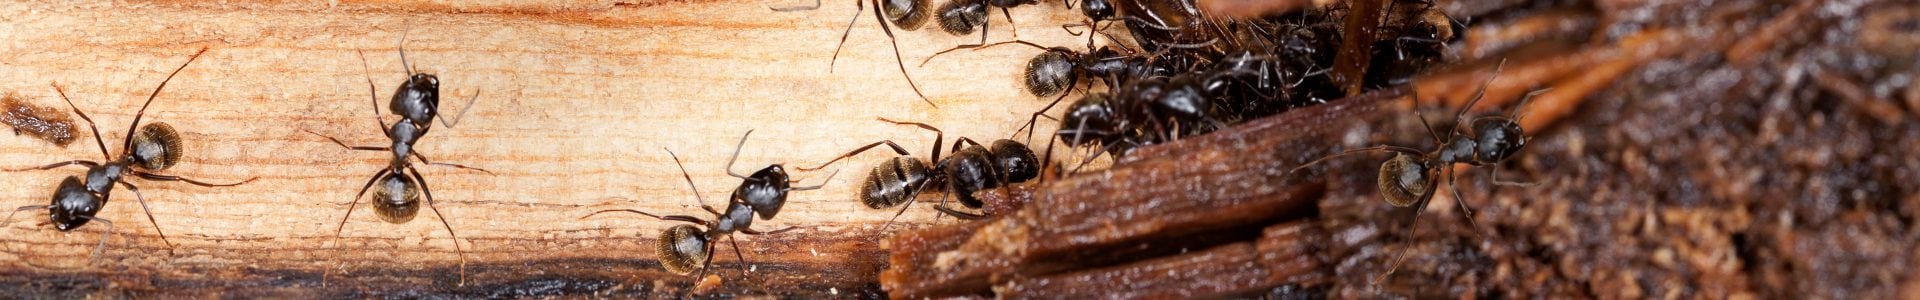 5 Effective Ant Control Tips